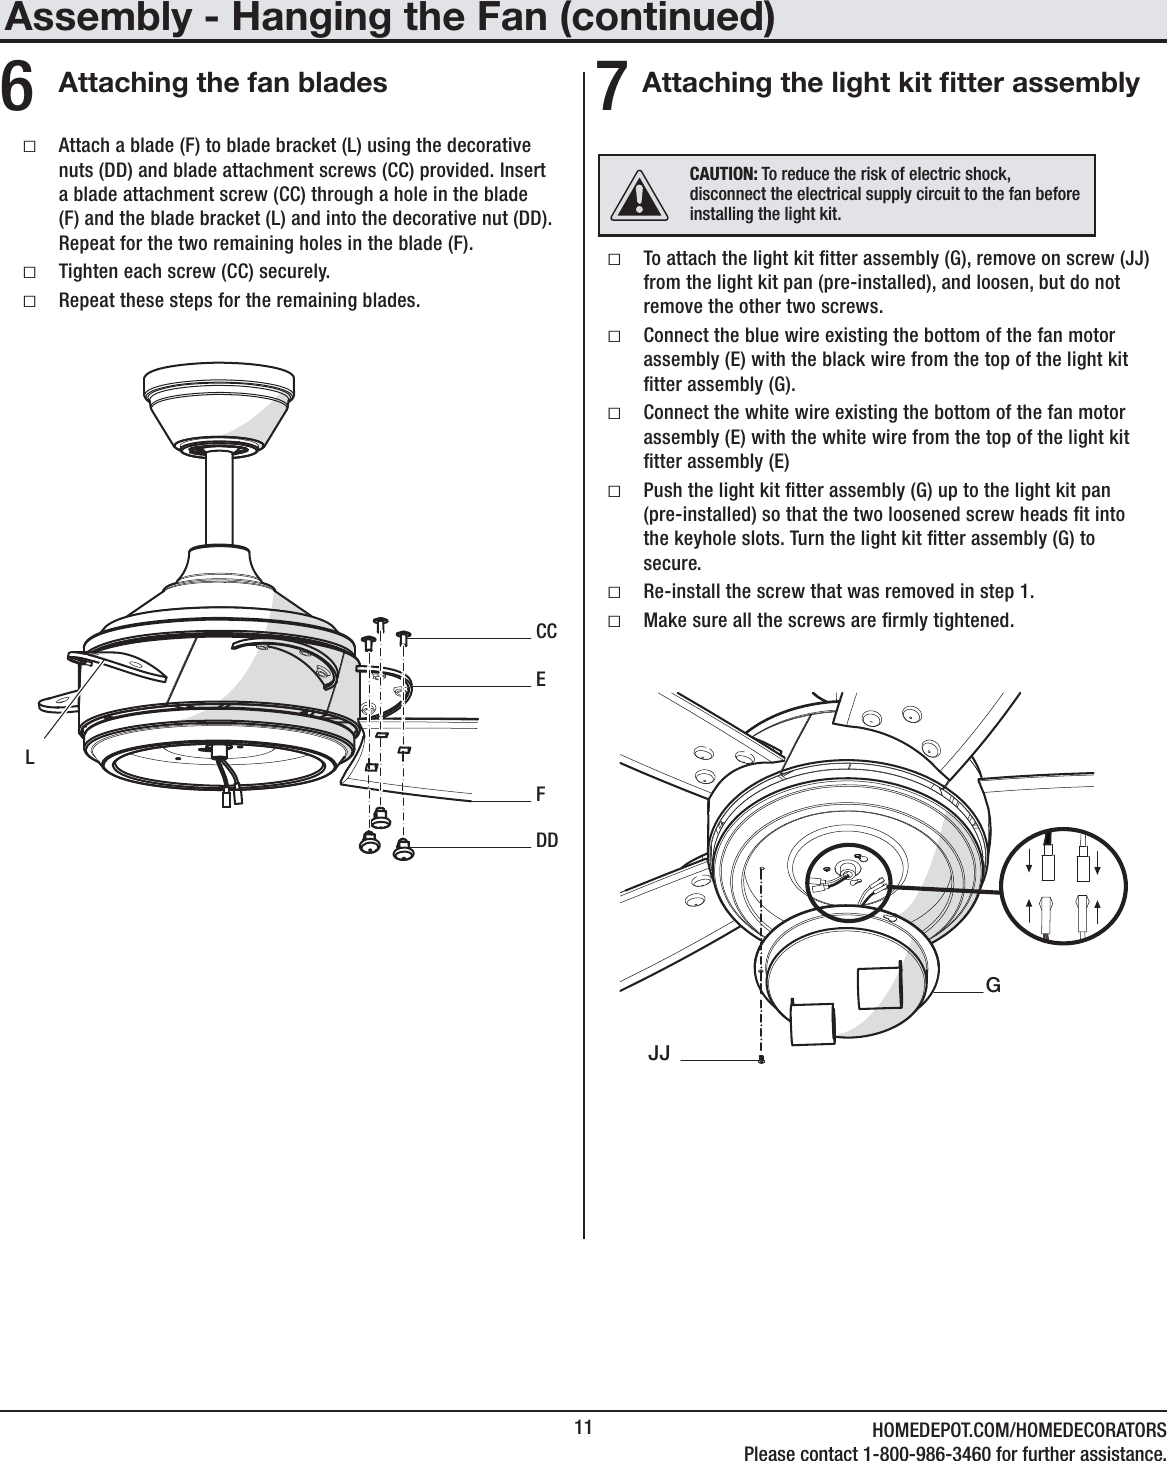 11 HOMEDEPOT.COM/HOMEDECORATORSPlease contact 1-800-986-3460 for further assistance.Attaching the fan blades6 ƑAttach a blade (F) to blade bracket (L) using the decorative nuts (DD) and blade attachment screws (CC) provided. Insert a blade attachment screw (CC) through a hole in the blade (F) and the blade bracket (L) and into the decorative nut (DD). Repeat for the two remaining holes in the blade (F). ƑTighten each screw (CC) securely. ƑRepeat these steps for the remaining blades.ECCDDFLAssembly - Hanging the Fan (continued)Attaching the light kit tter assembly7 ƑTo attach the light kit tter assembly (G), remove on screw (JJ) from the light kit pan (pre-installed), and loosen, but do not remove the other two screws. ƑConnect the blue wire existing the bottom of the fan motor assembly (E) with the black wire from the top of the light kit tter assembly (G). ƑConnect the white wire existing the bottom of the fan motor assembly (E) with the white wire from the top of the light kit tter assembly (E) ƑPush the light kit tter assembly (G) up to the light kit pan (pre-installed) so that the two loosened screw heads t into the keyhole slots. Turn the light kit tter assembly (G) to secure.  ƑRe-install the screw that was removed in step 1. ƑMake sure all the screws are rmly tightened.  JJGCAUTION: To reduce the risk of electric shock, disconnect the electrical supply circuit to the fan before installing the light kit. 